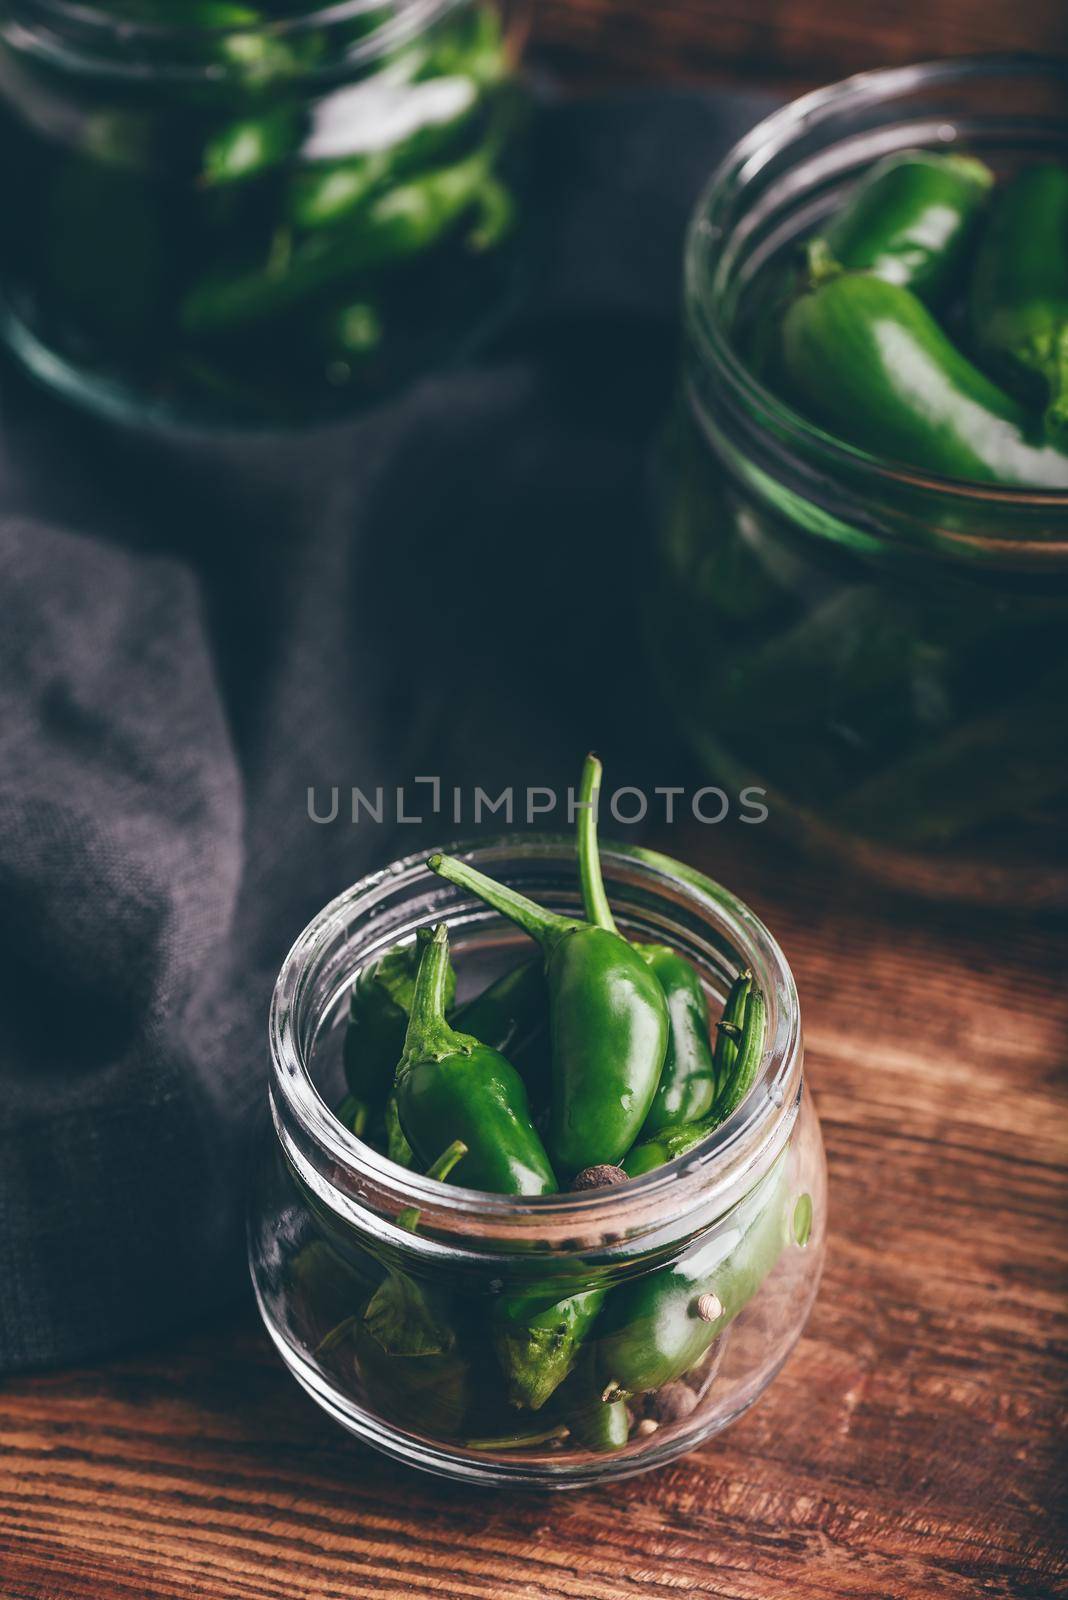 Canned Jalapeno Peppers, Garlic And Glass Jars by Seva_blsv